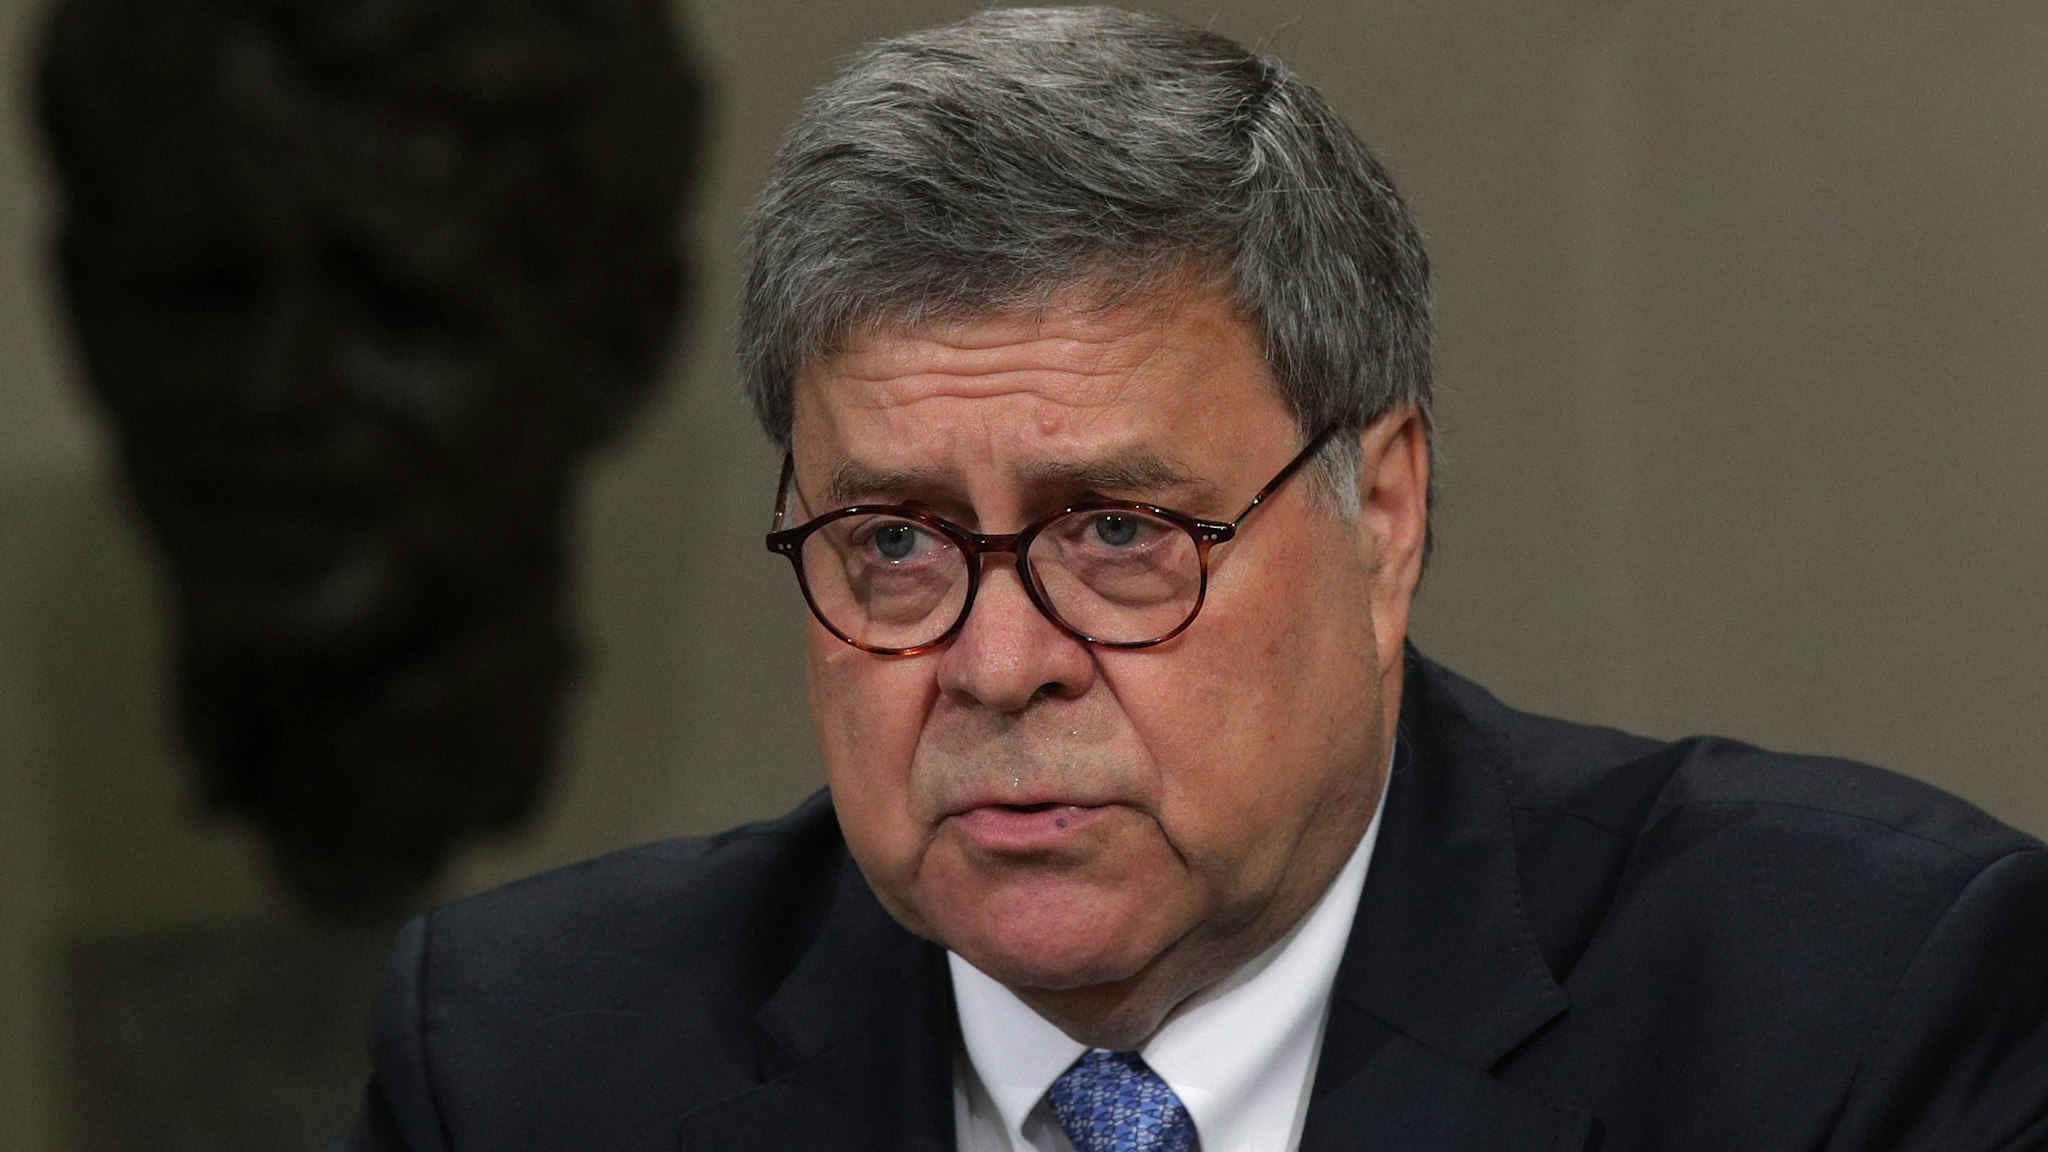 WASHINGTON, DC - JULY 15: U.S. Attorney General William Barr speaks during a "Combating Anti-Semitism Summit" at the Justice Department July 15, 2019 in Washington, DC. Administration officials and Jewish leaders are participating in the summit to discuss ways to combat anti-semitism